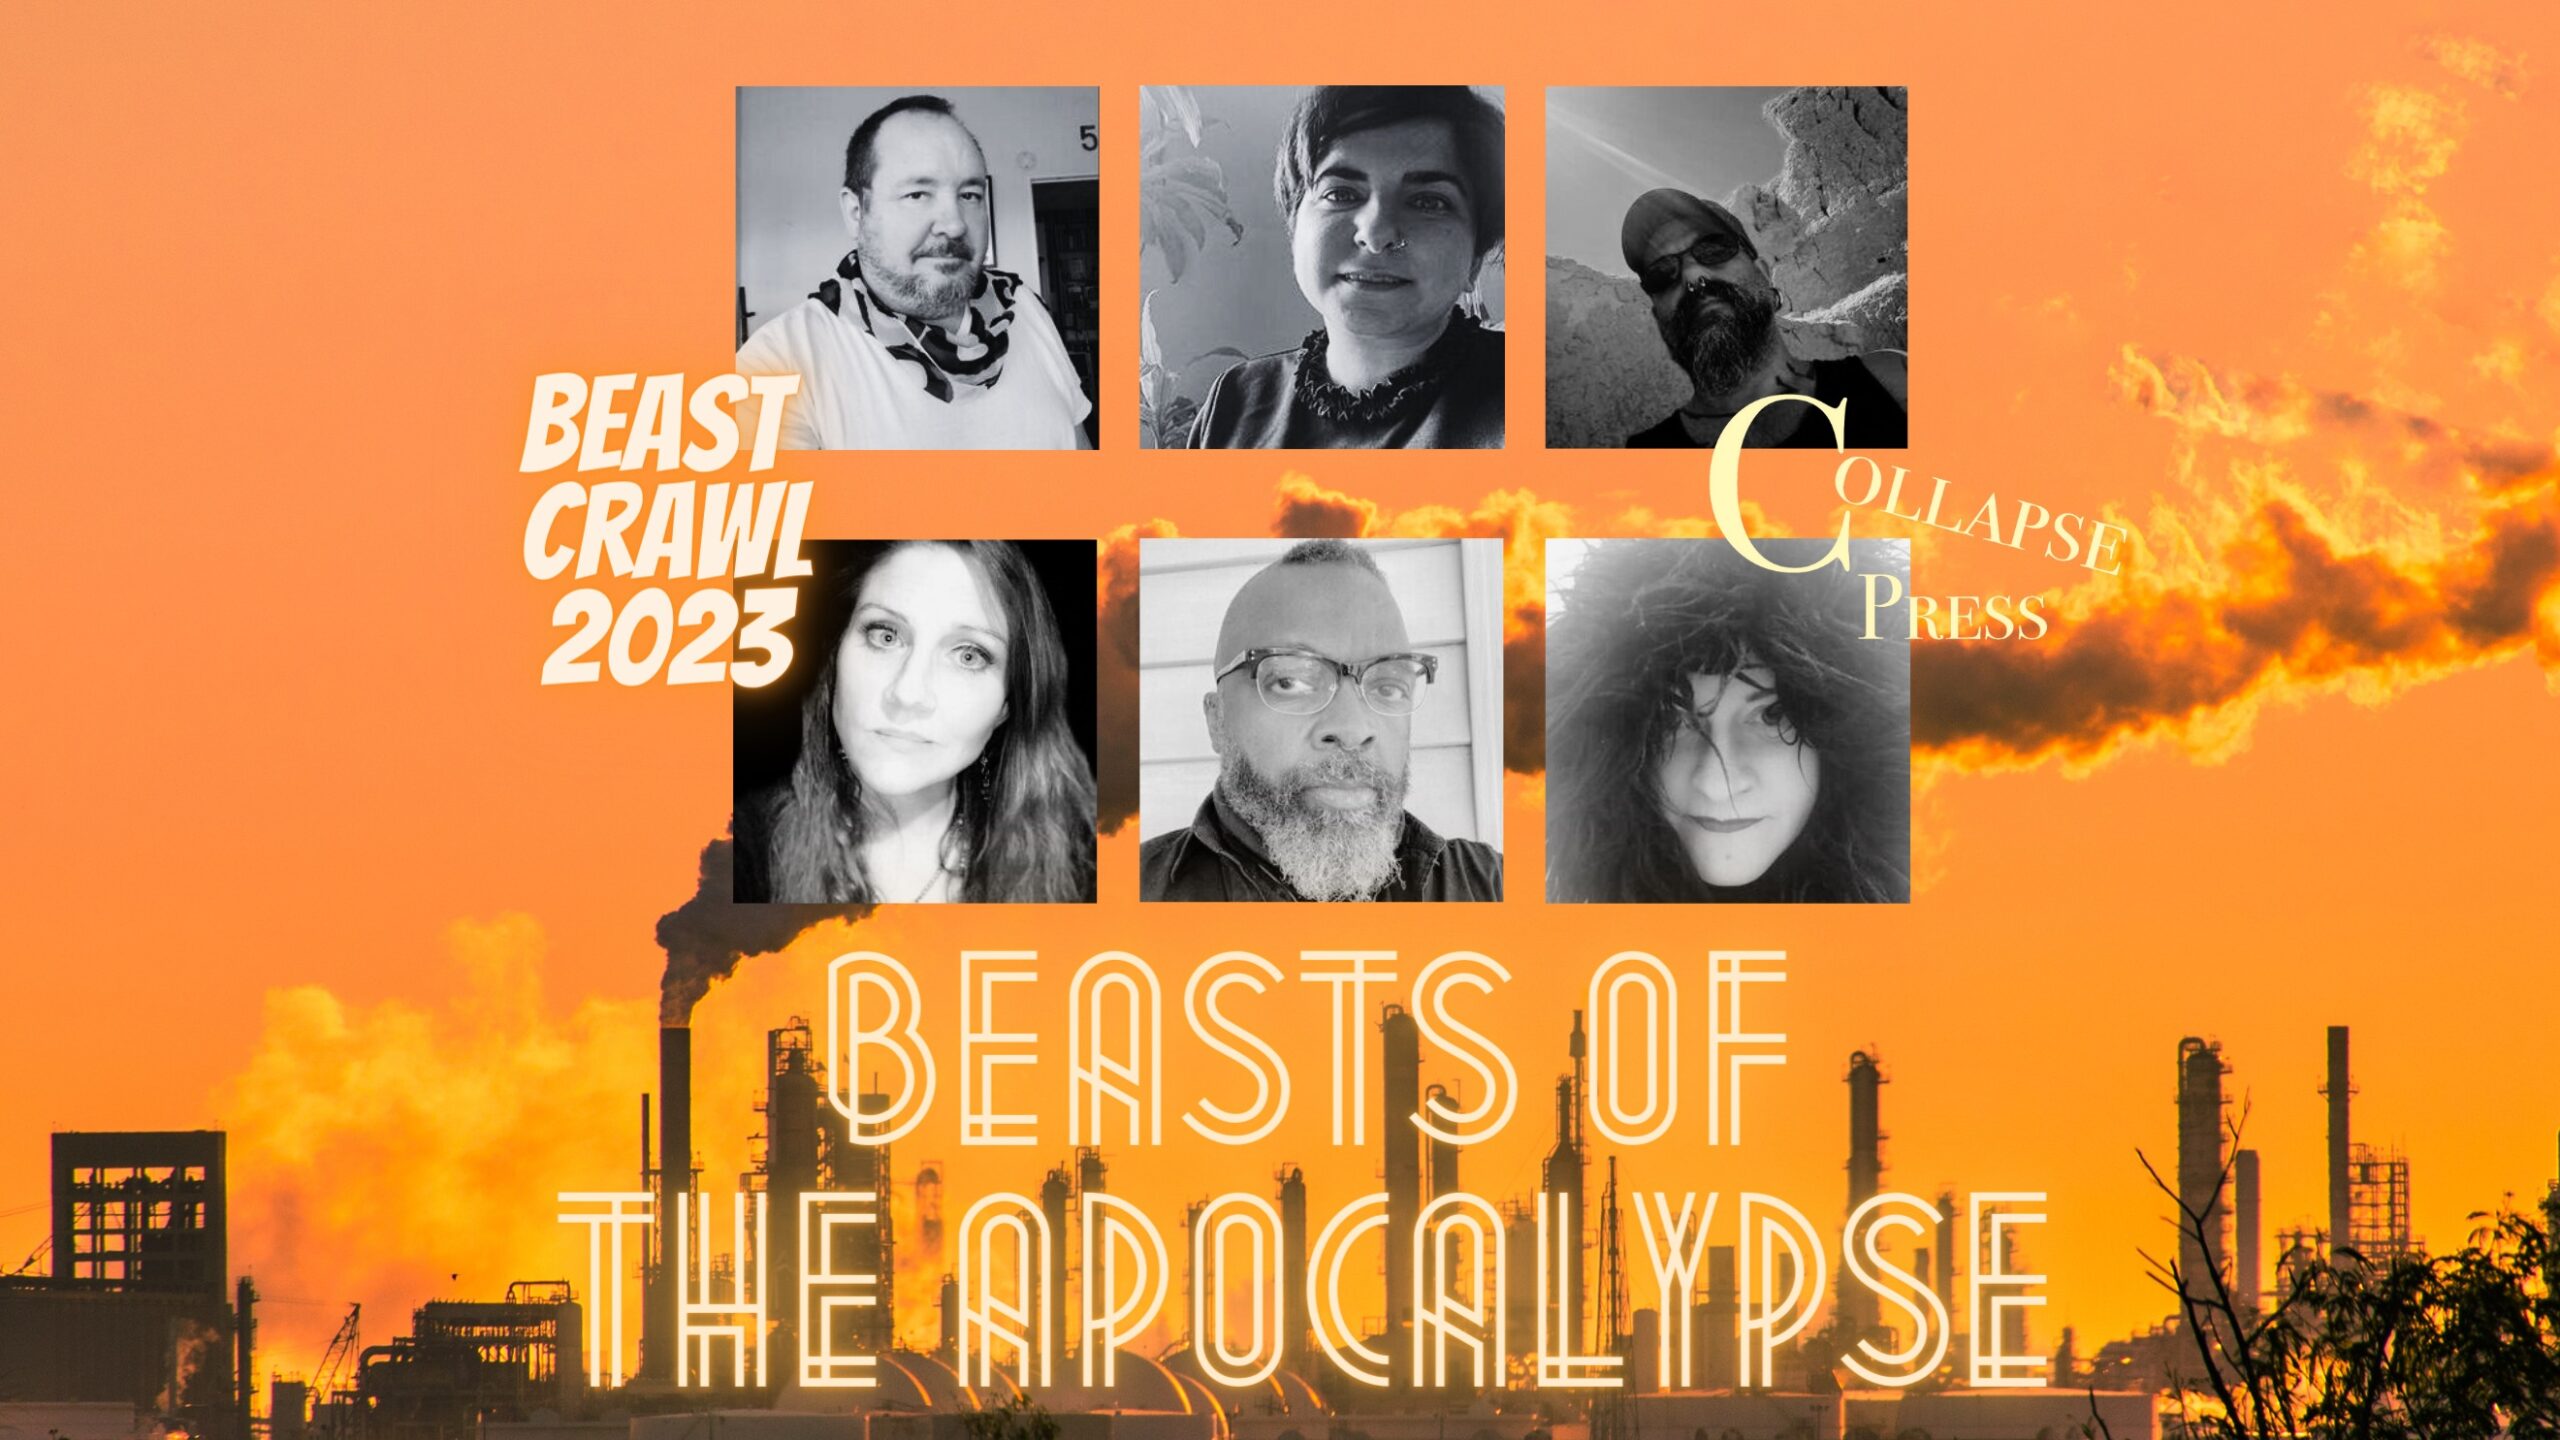 Collapse Press curates another event for the Oakland Beast crawl, 2023